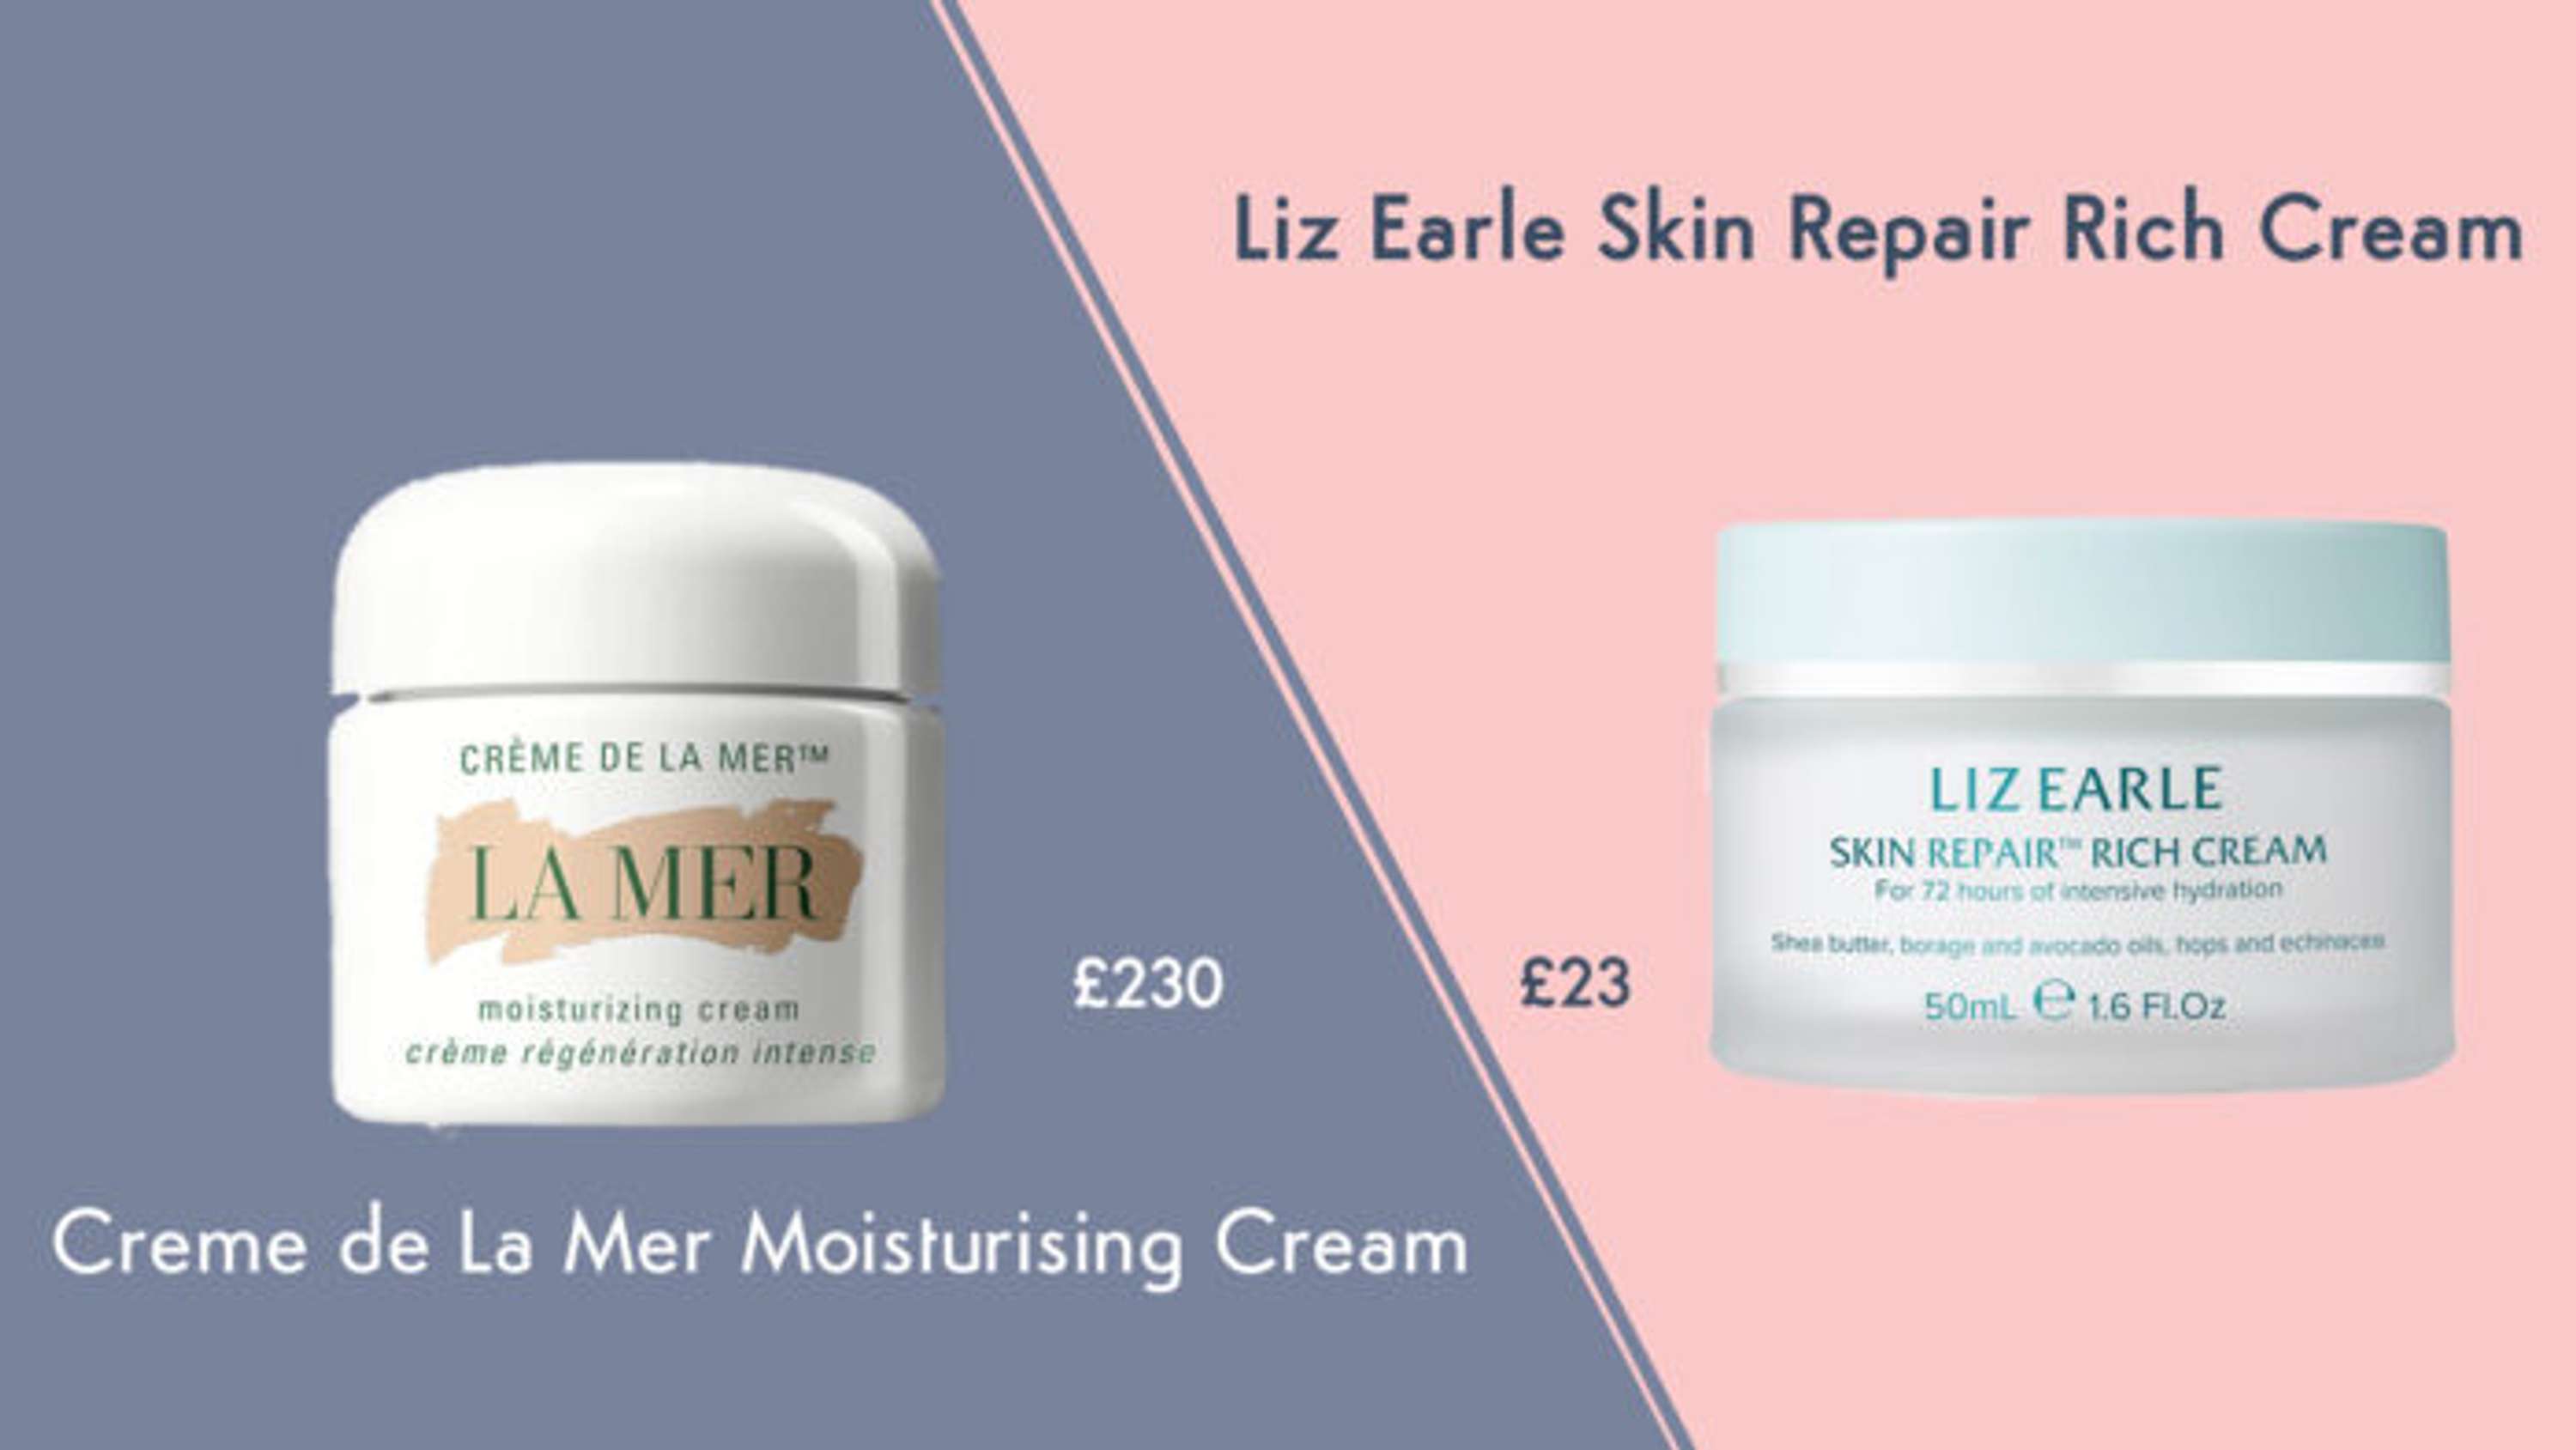 Mixing These 2 Products Makes an Amazing La Mer Dupe